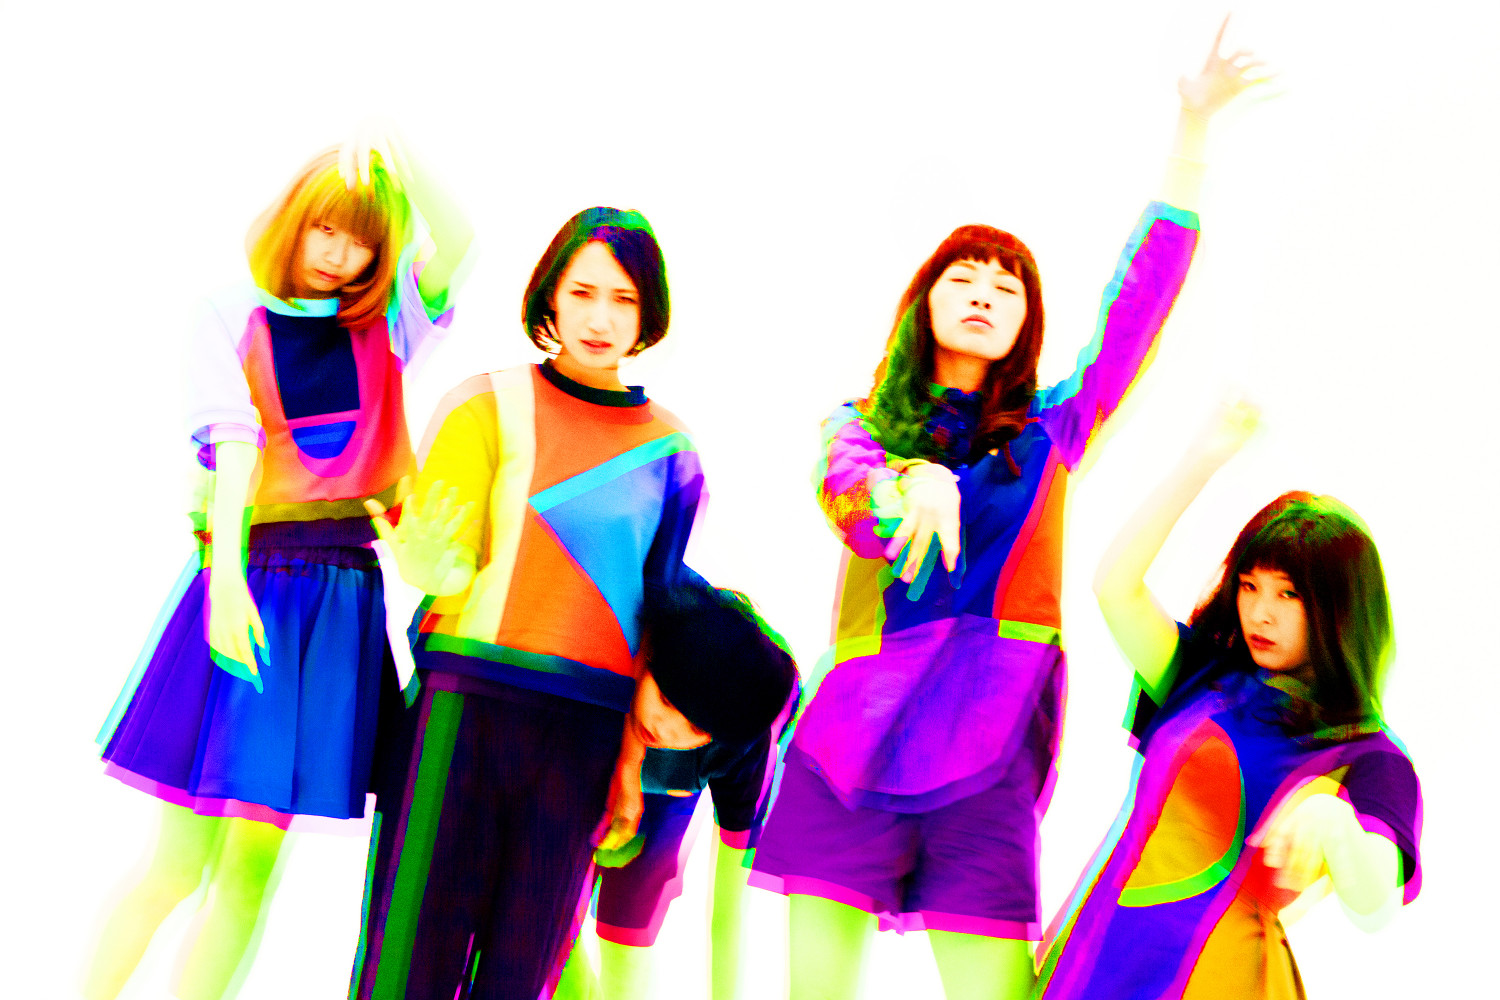 BiS Scramble Through the Streets of Shibuya in the Kenkyuuin Filmed MV for “Change The World”!